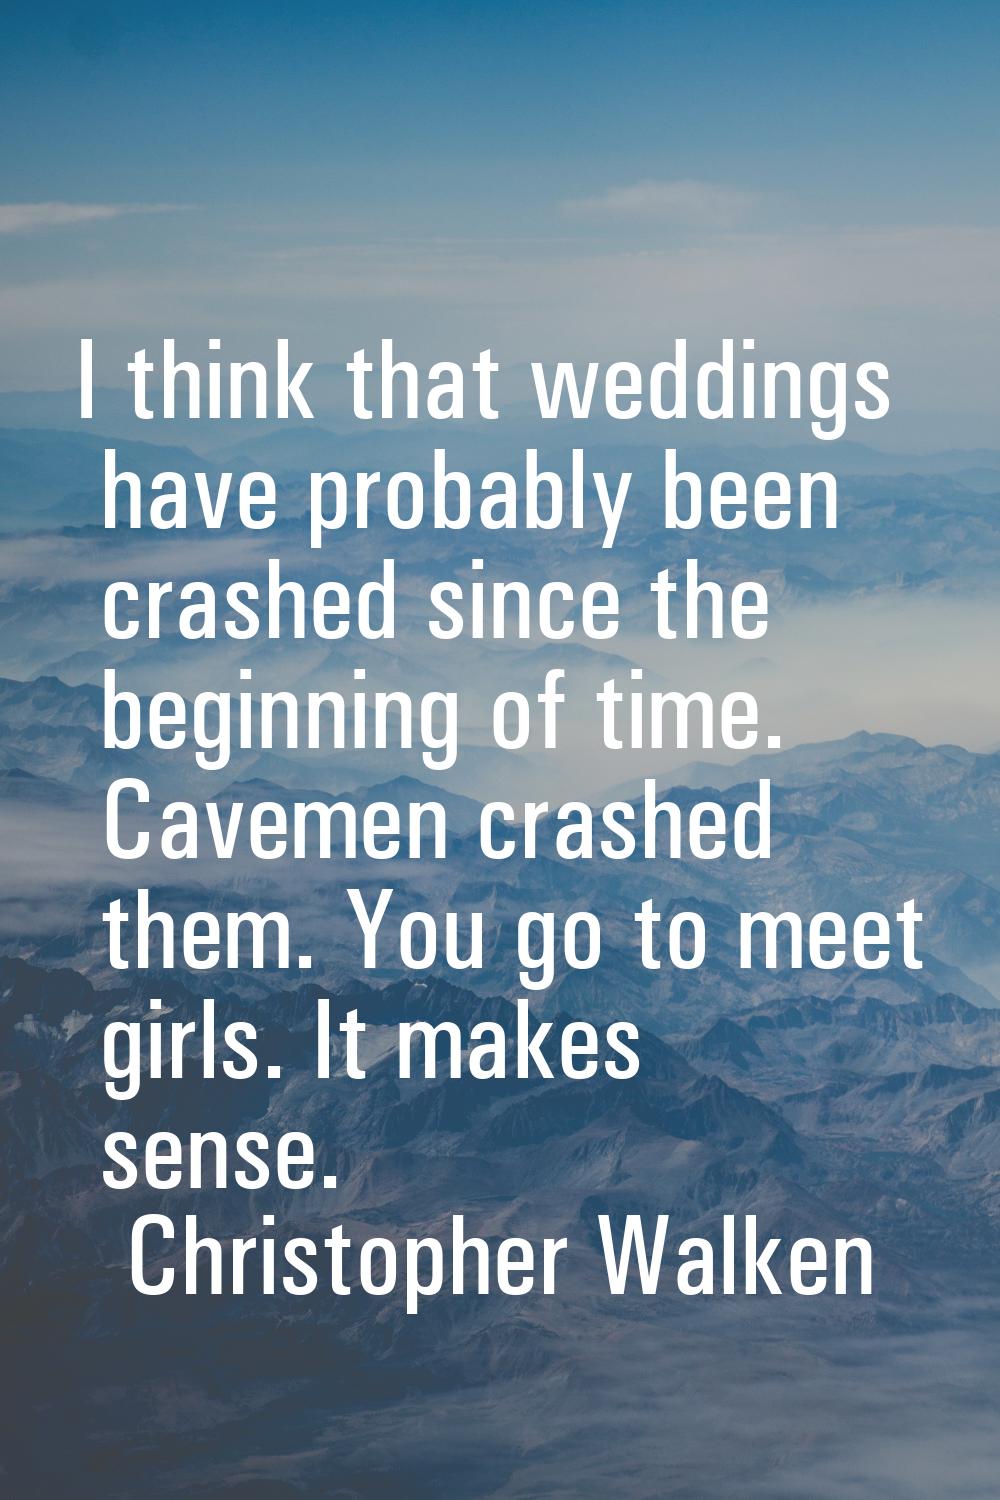 I think that weddings have probably been crashed since the beginning of time. Cavemen crashed them.